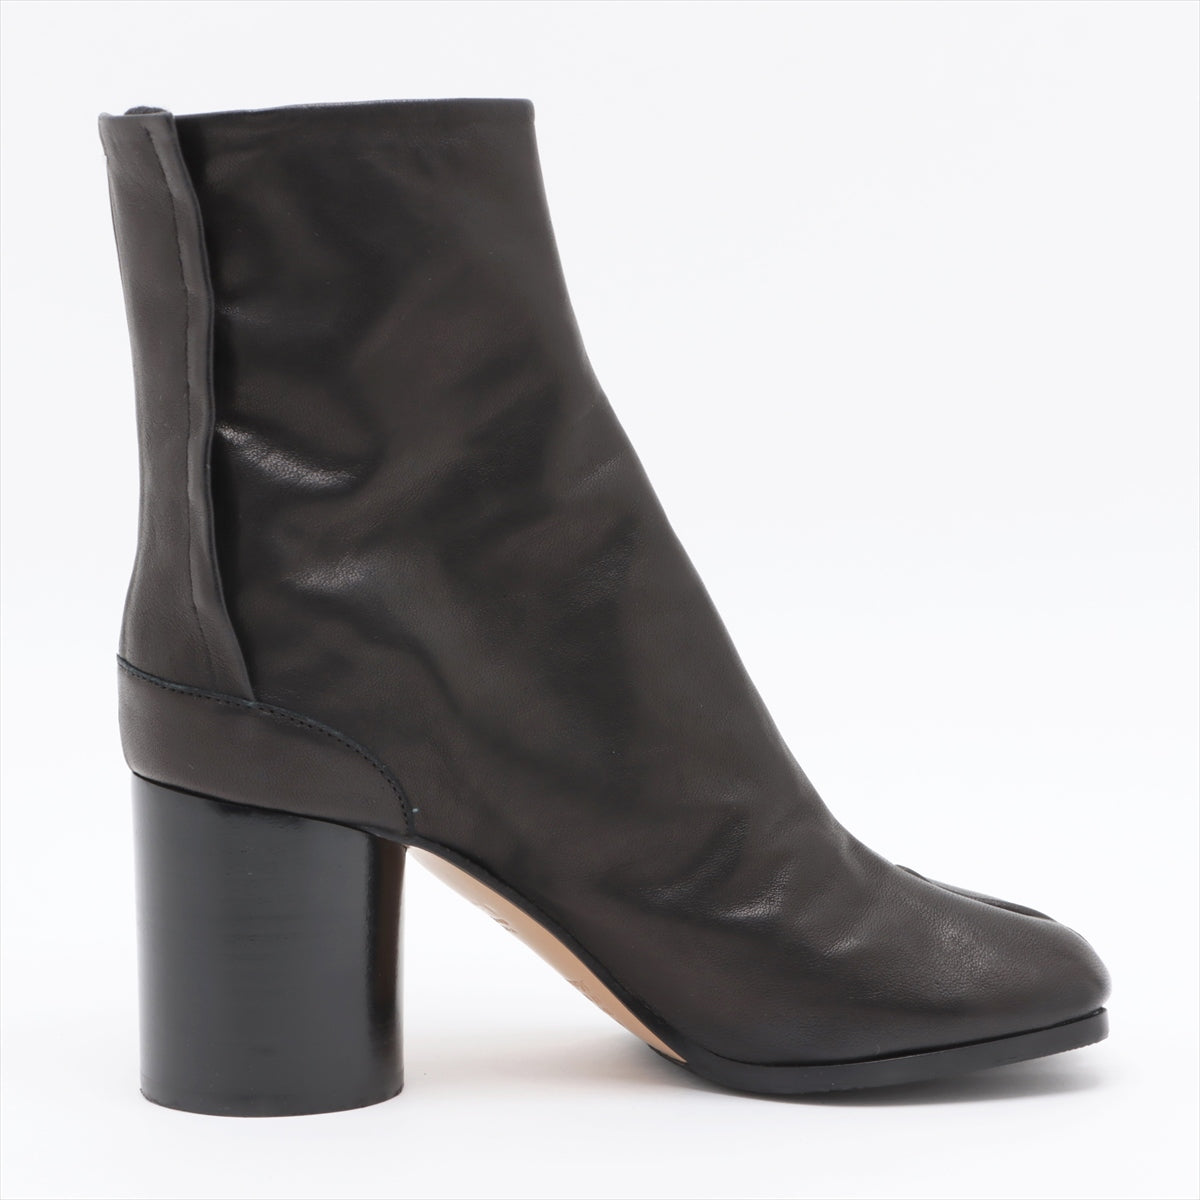 Maison Margiela TABI Leather Short Boots 36 Ladies' Black 22  box There is a bag